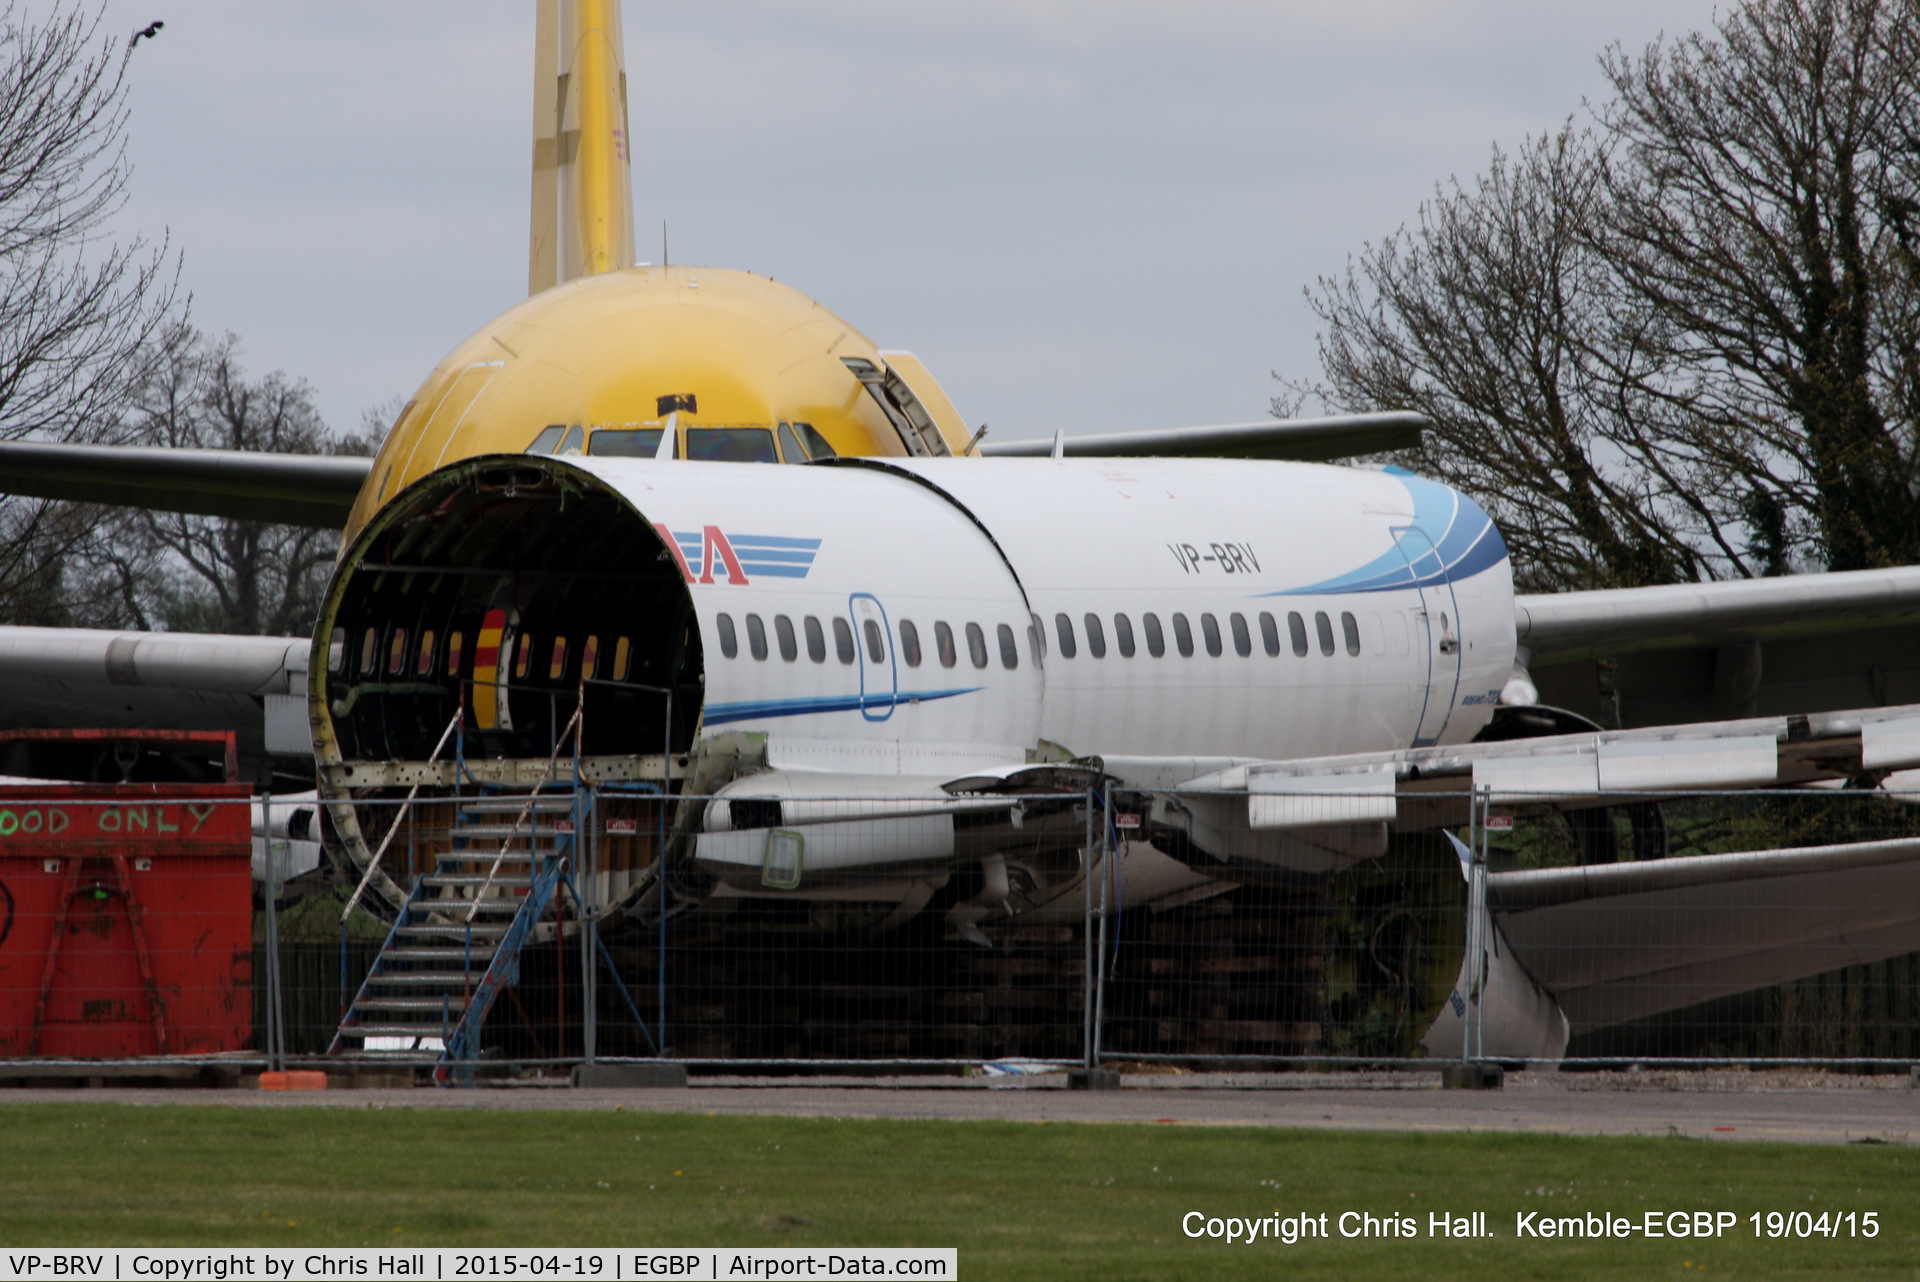 VP-BRV, 1991 Boeing 737-528 C/N 25227, ex Yamal Airlines, in the scrapping area at Kemble